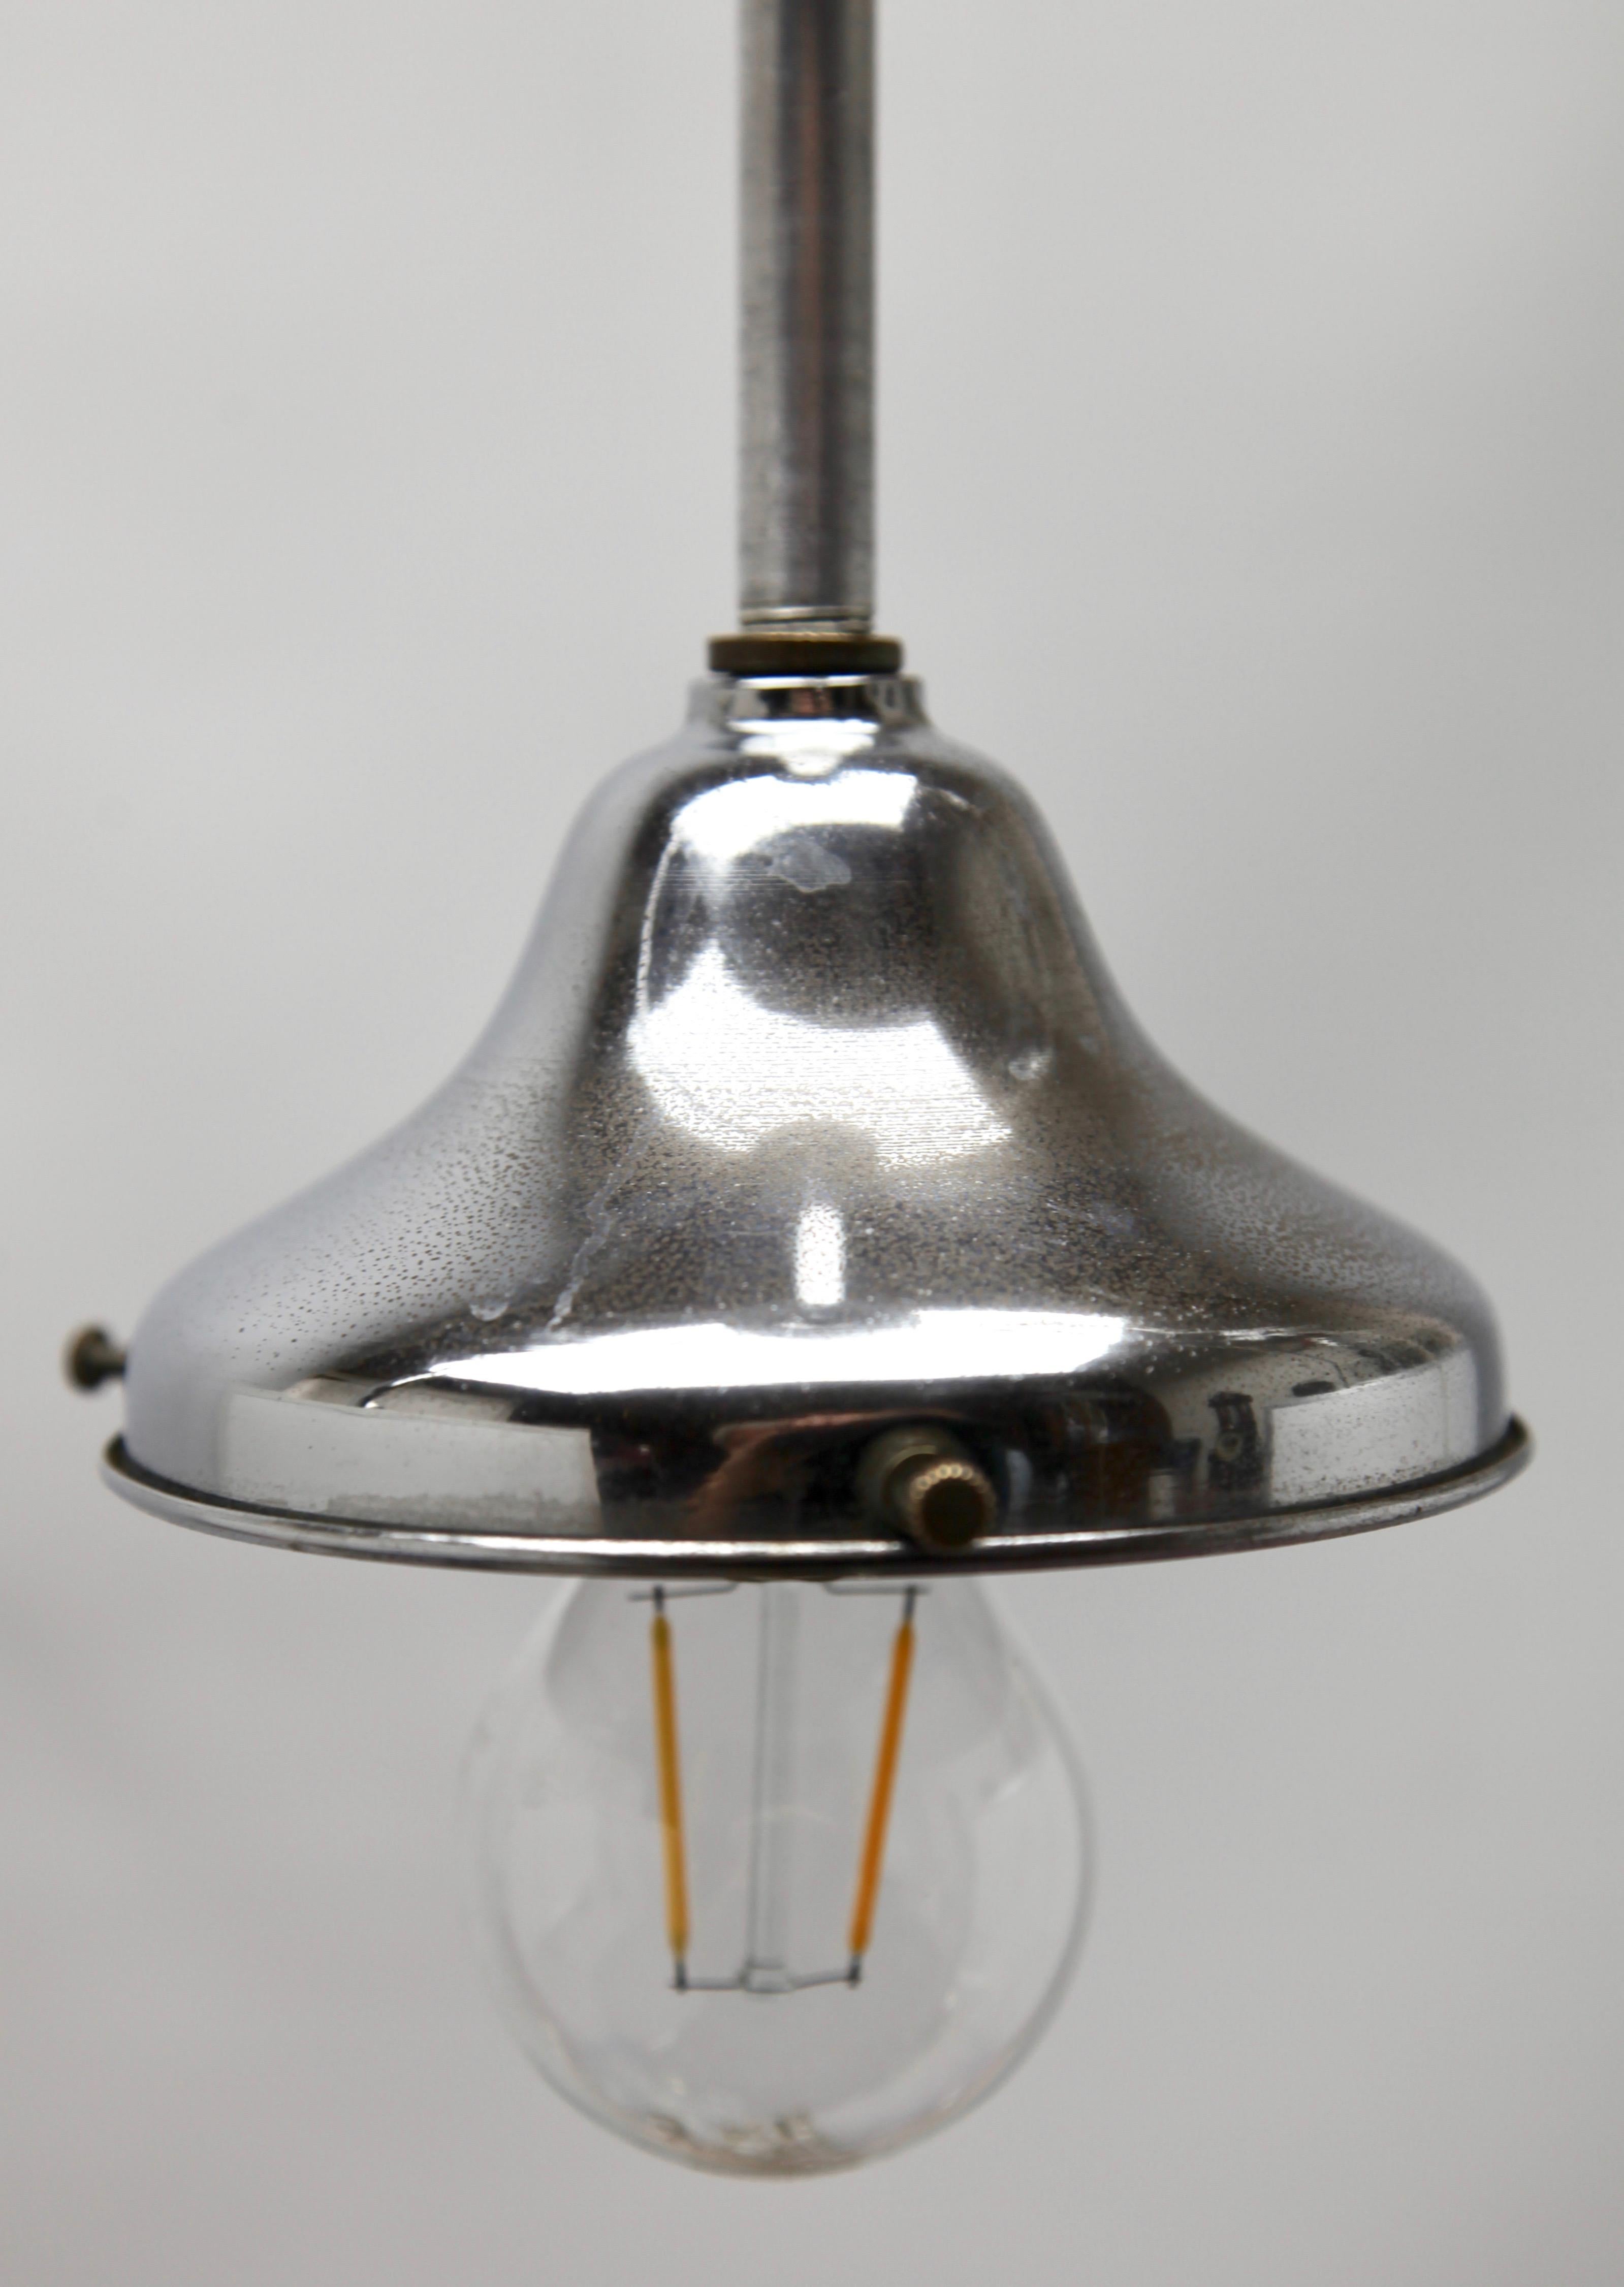 Phillips Pendant Stem Lamp with a Globular Opaline Shade, 1930s, Netherlands For Sale 4